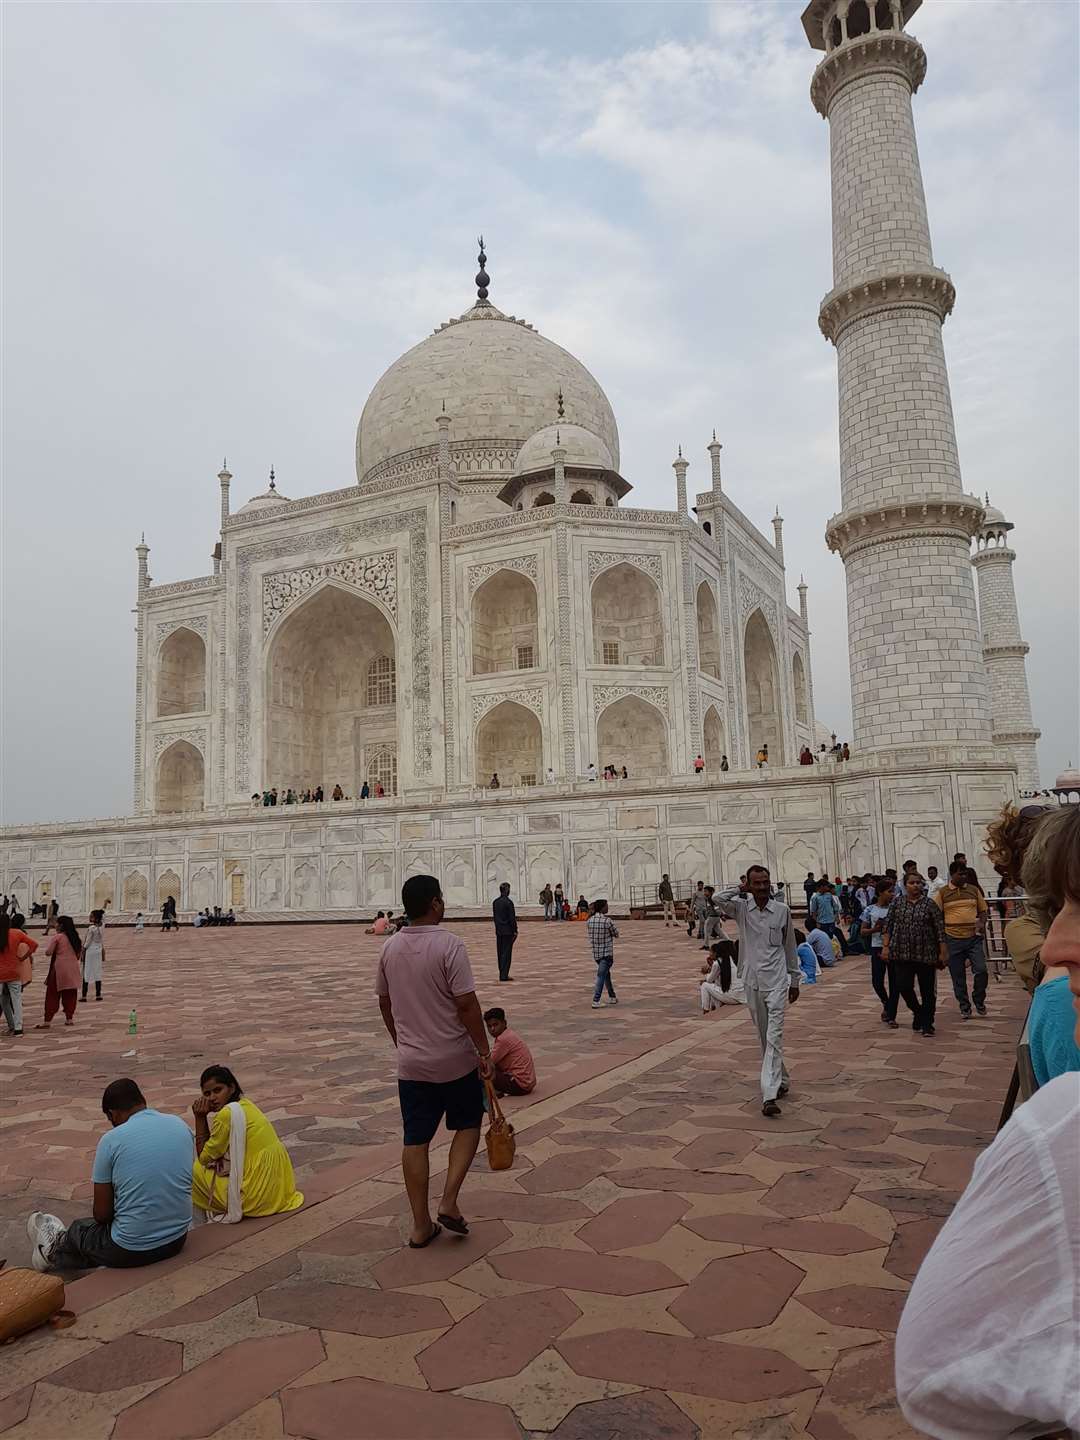 The group had the opportunity to visit the Taj Mahal.